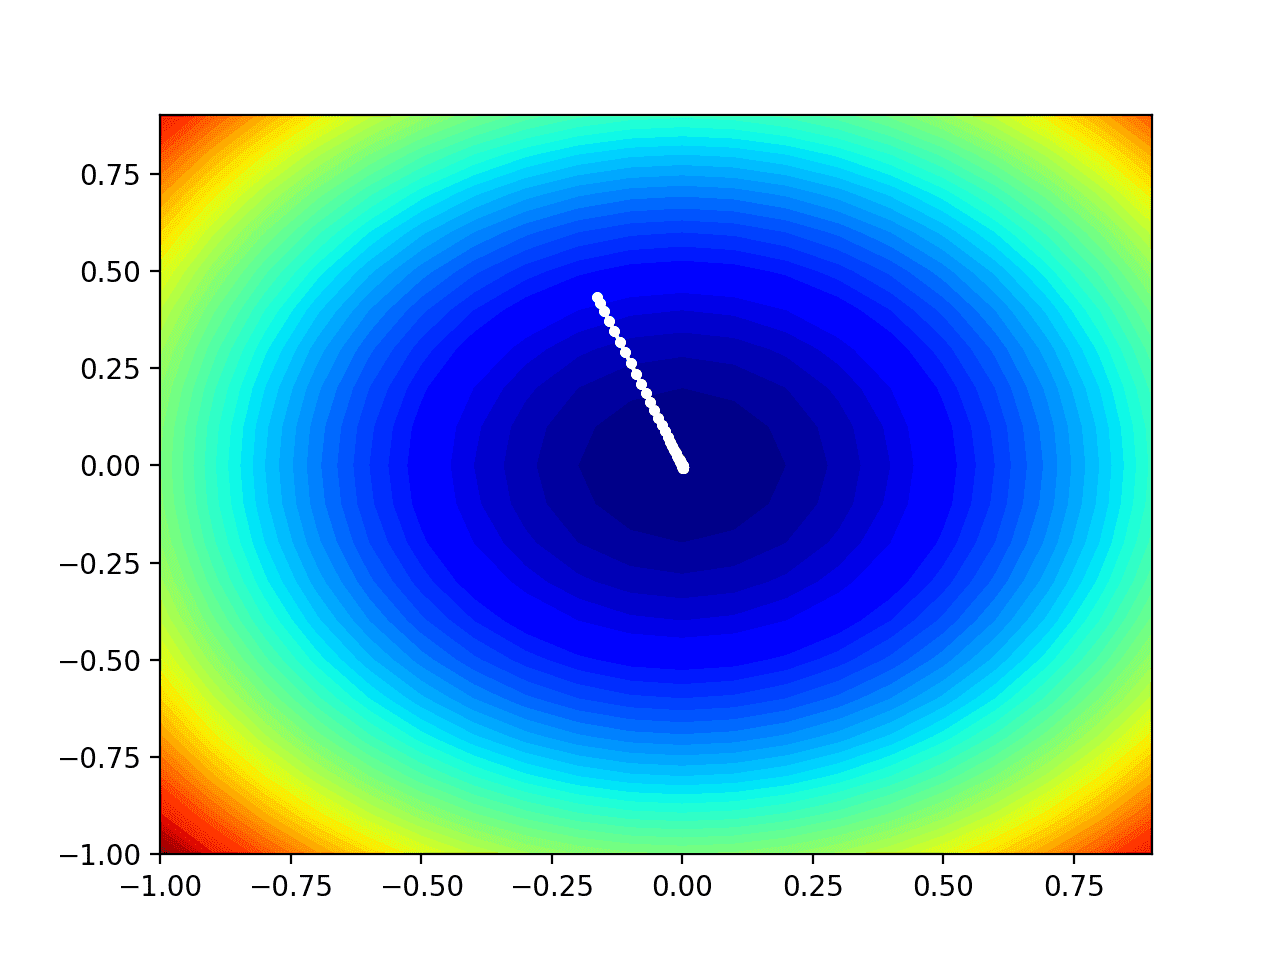 Contour Plot of the Test Objective Function With Nesterov Momentum Search Results Shown